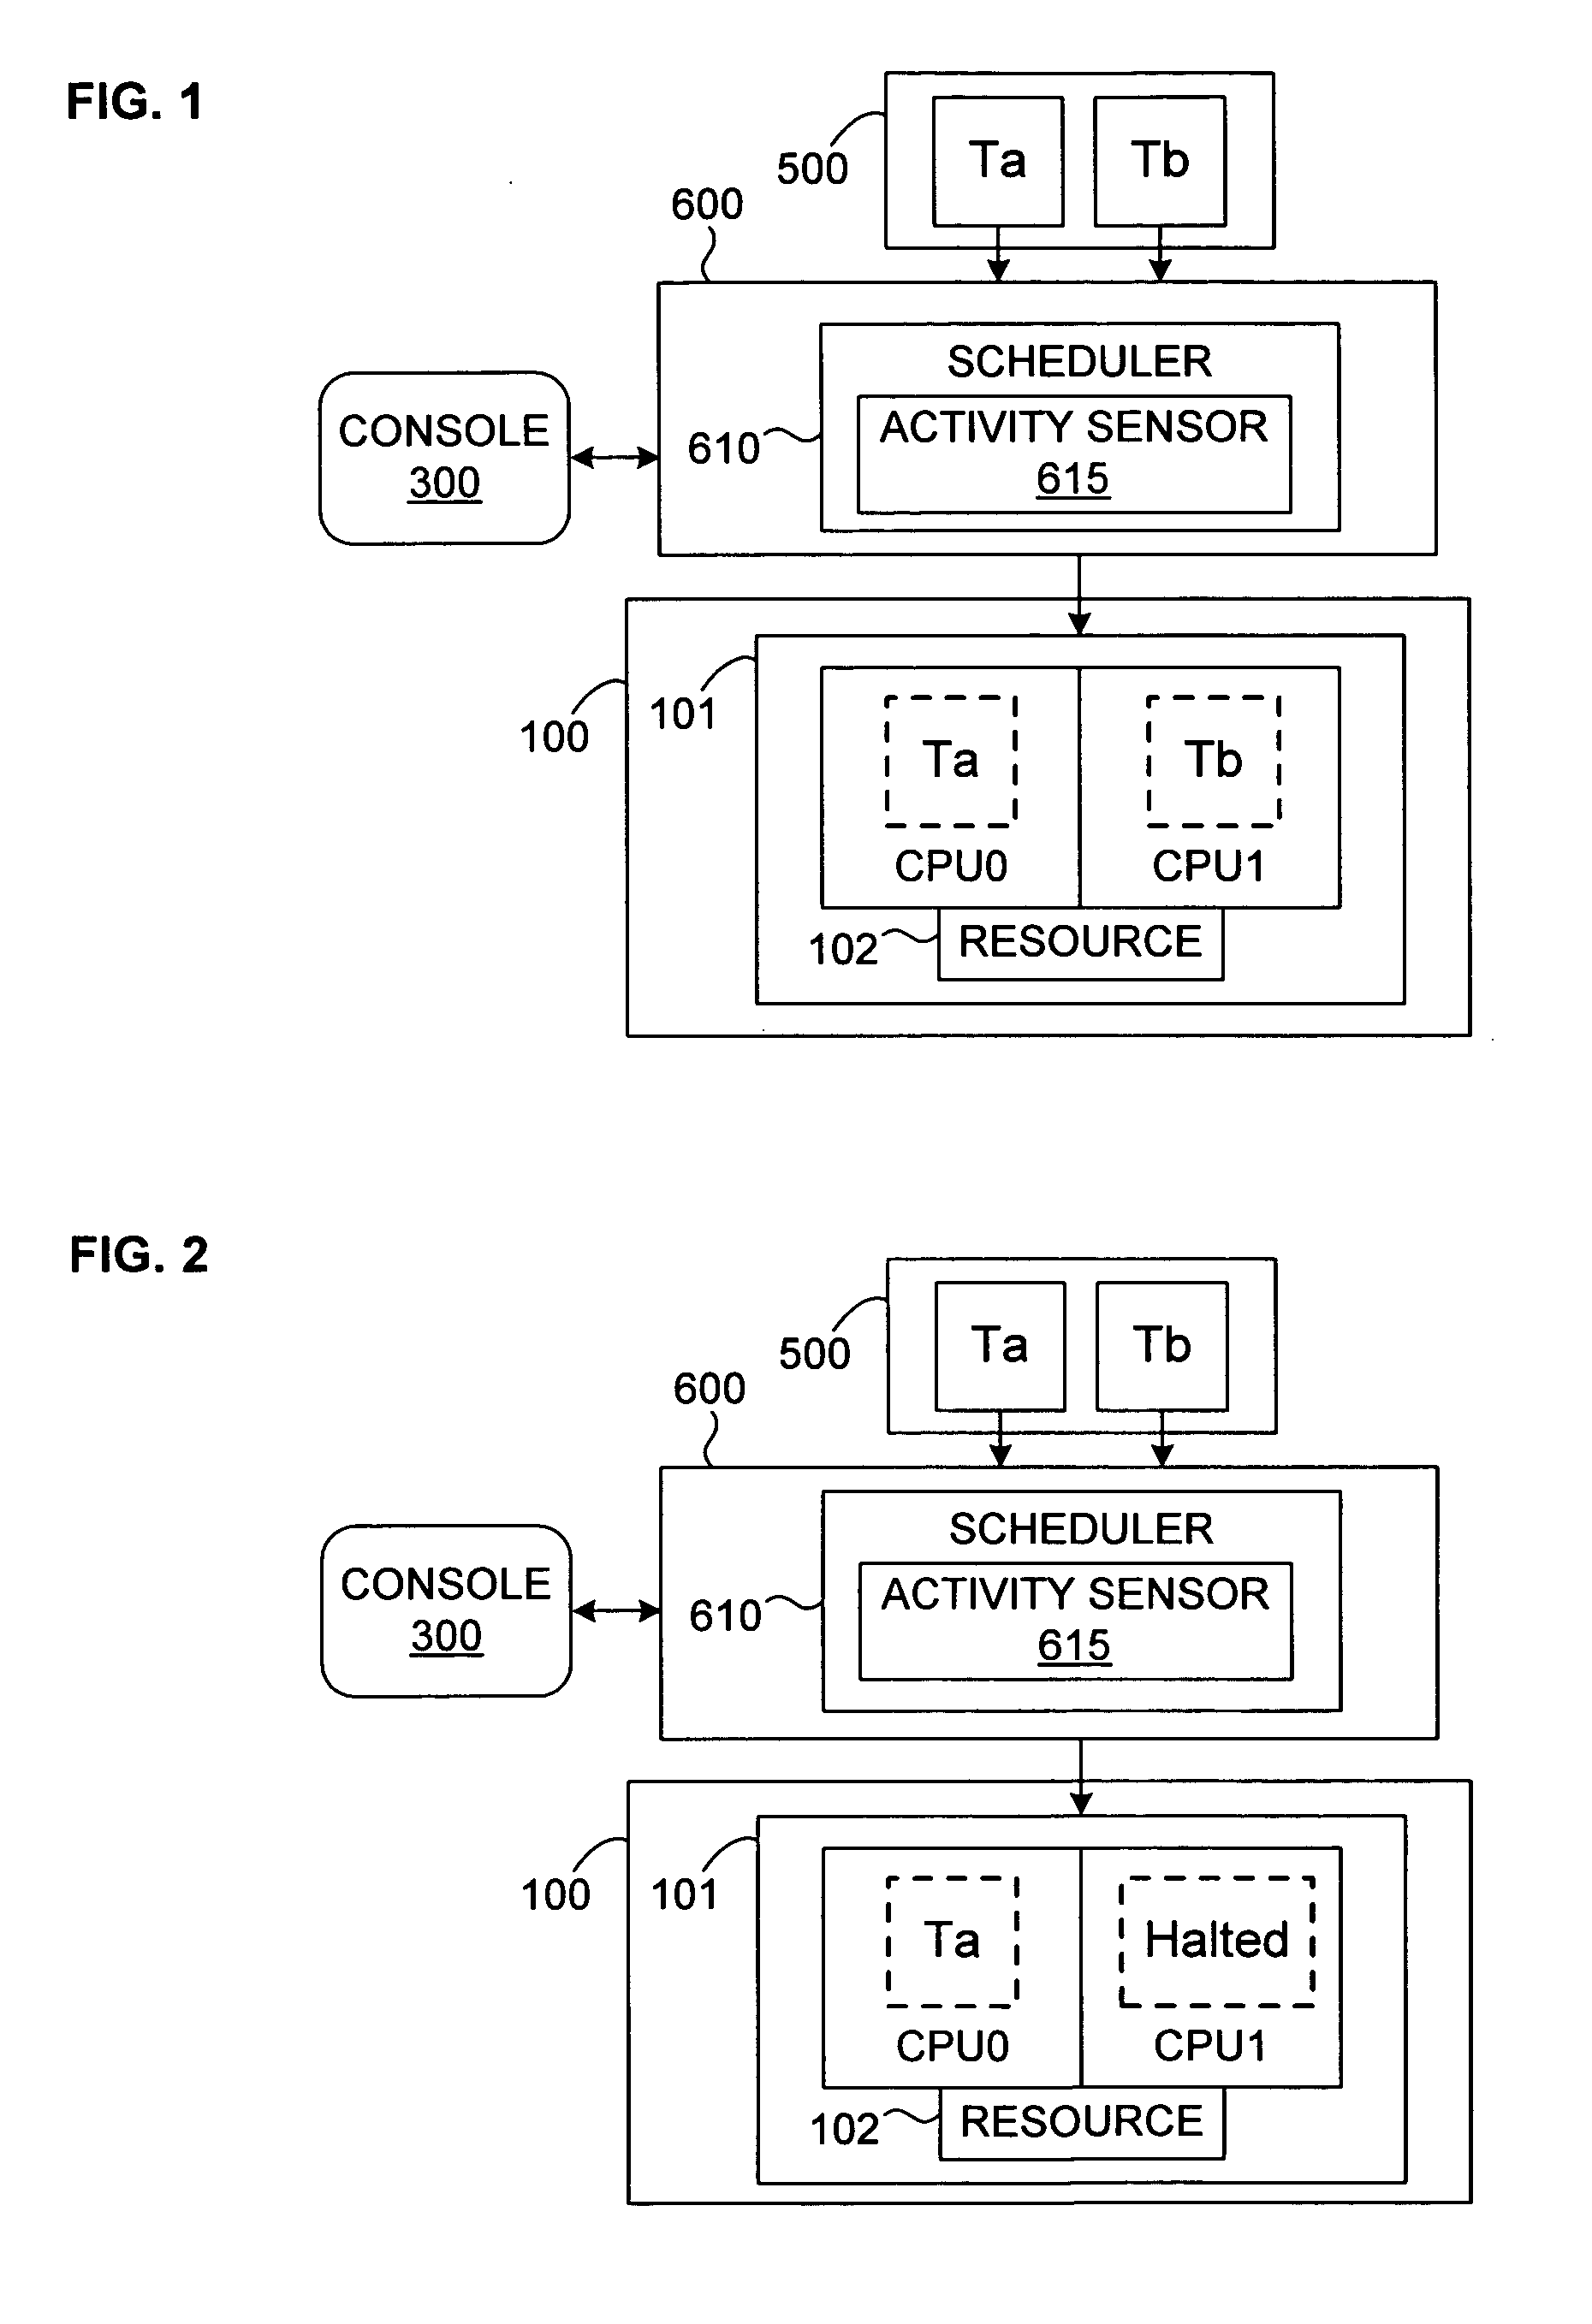 Mechanism for scheduling execution of threads for fair resource allocation in a multi-threaded and/or multi-core processing system